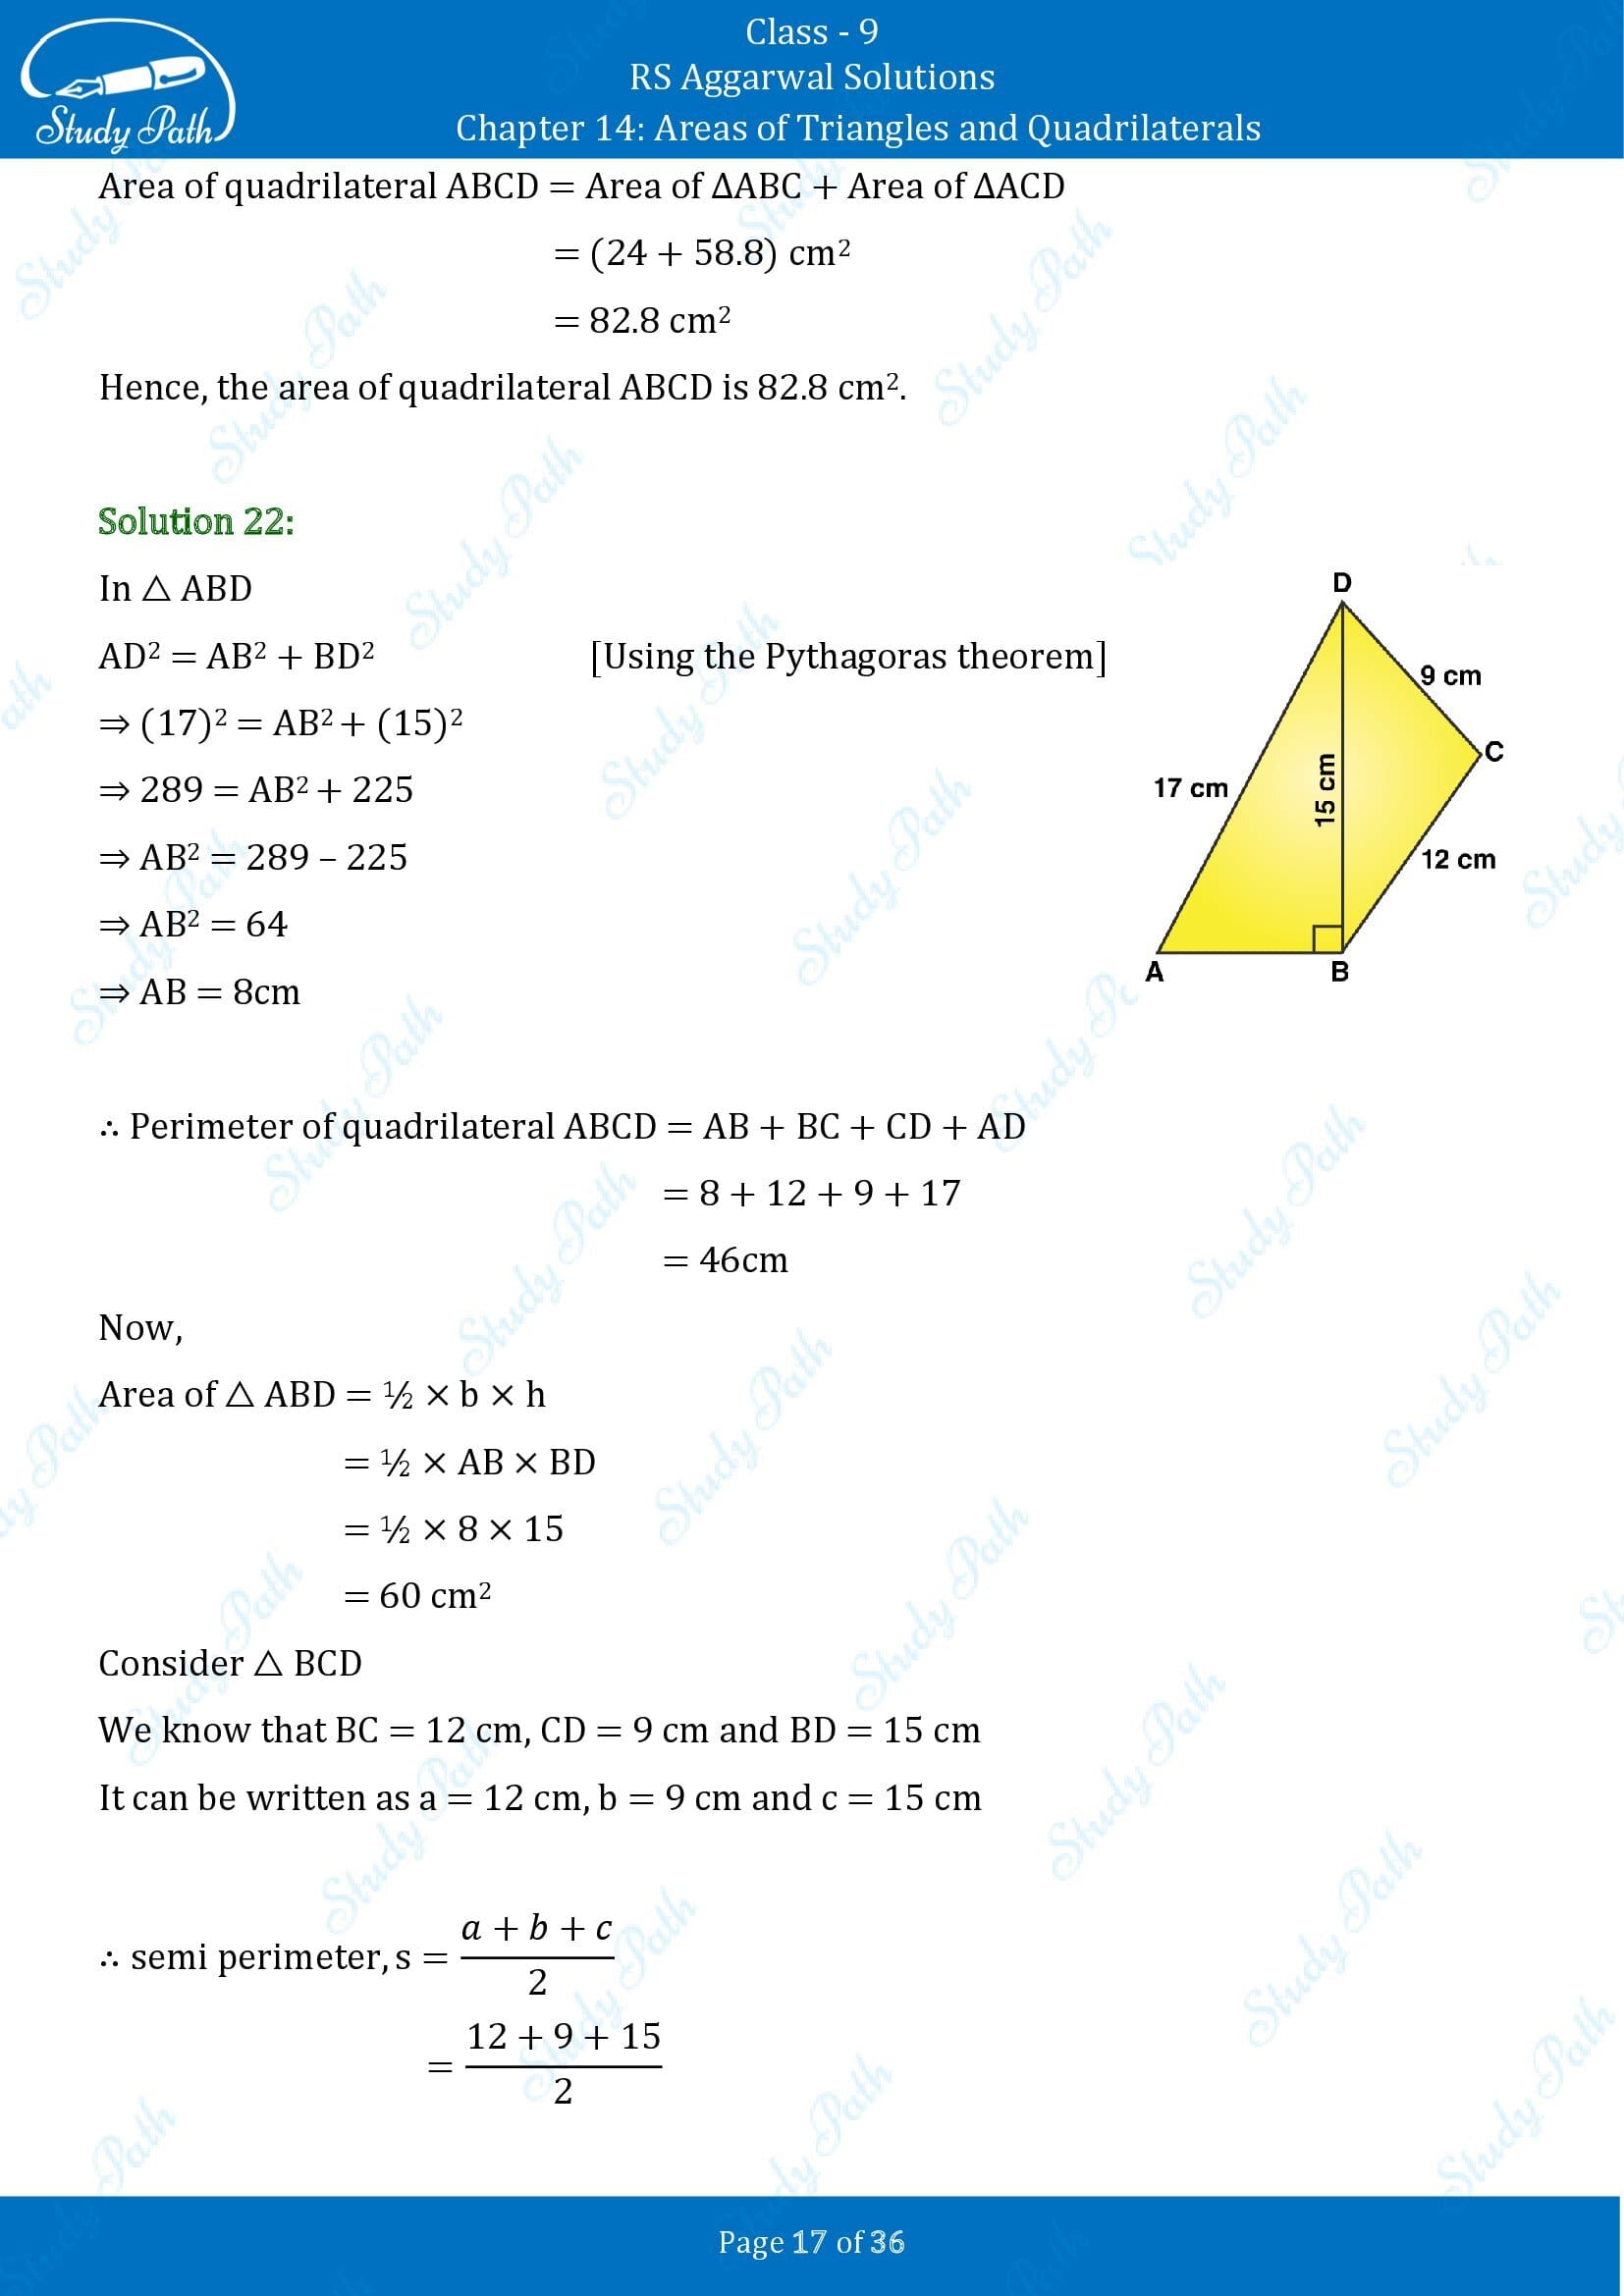 RS Aggarwal Solutions Class 9 Chapter 14 Areas of Triangles and Quadrilaterals Exercise 14 00017